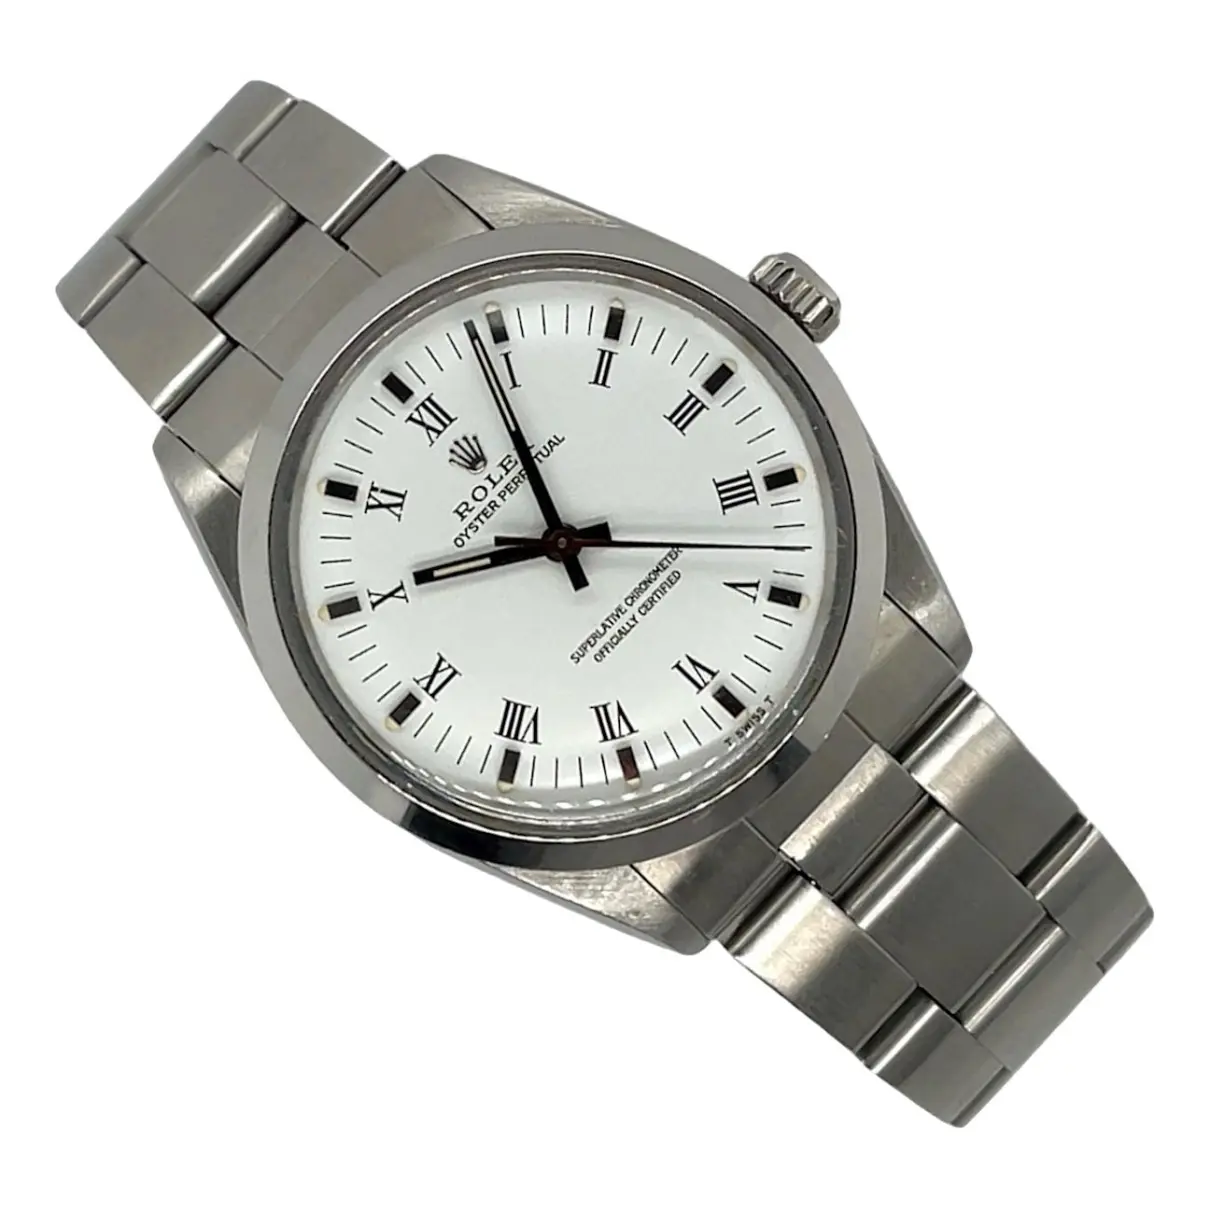 Oyster Perpetual 34mm watch